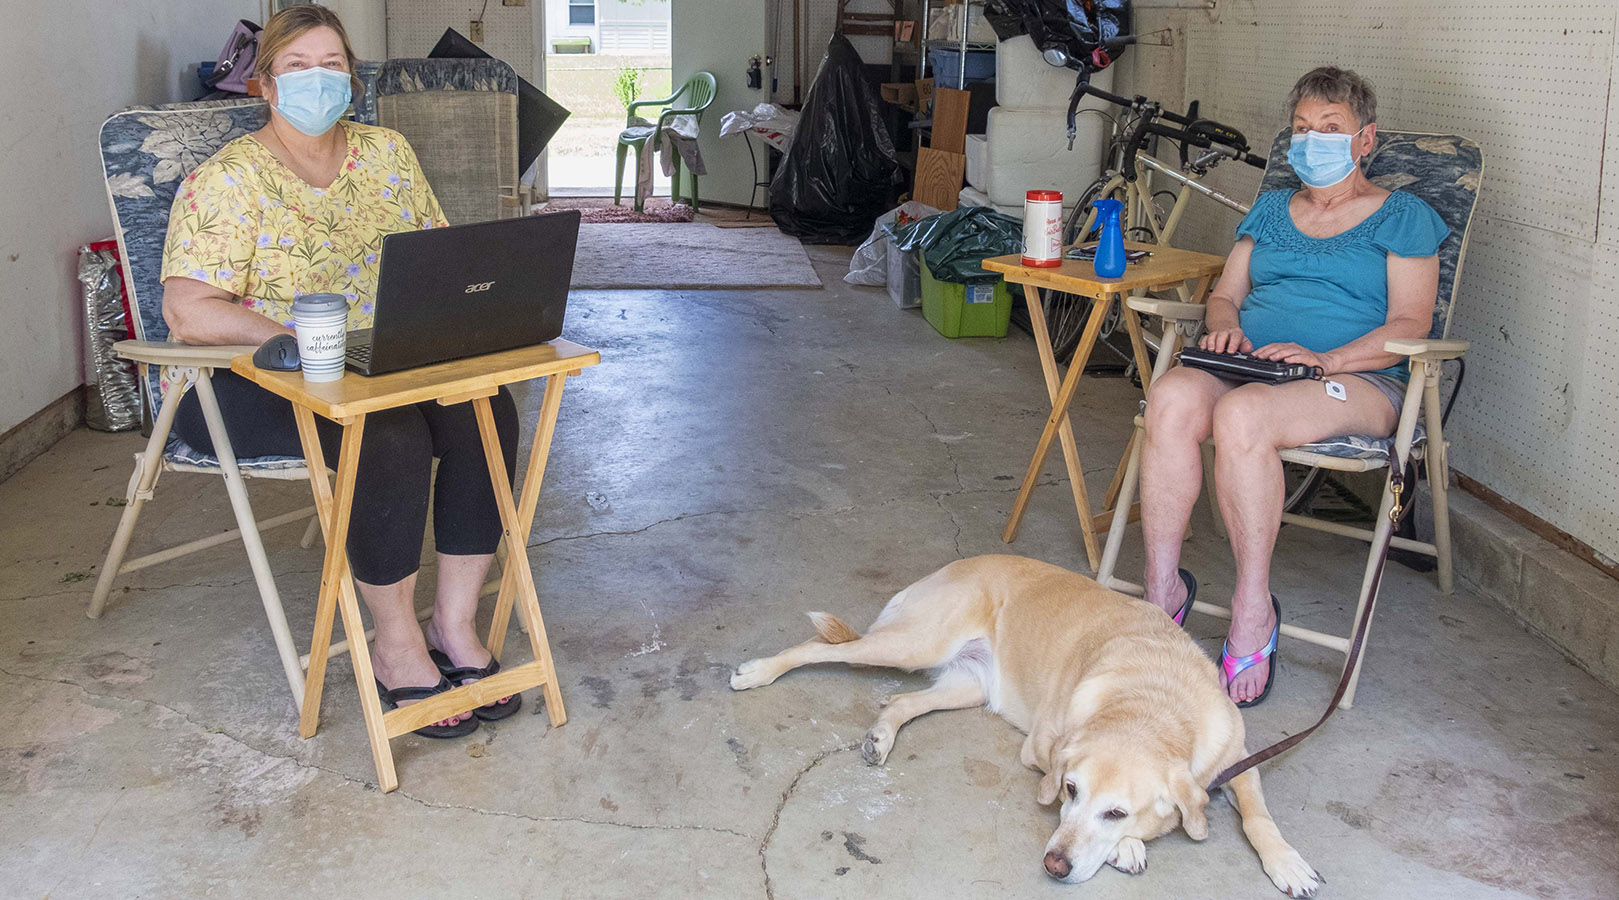 Two White women are socially distanced in a garage, both wearing masks -- one woman uses a braille notetaker as a dog lies at her feet and the other uses a laptop.